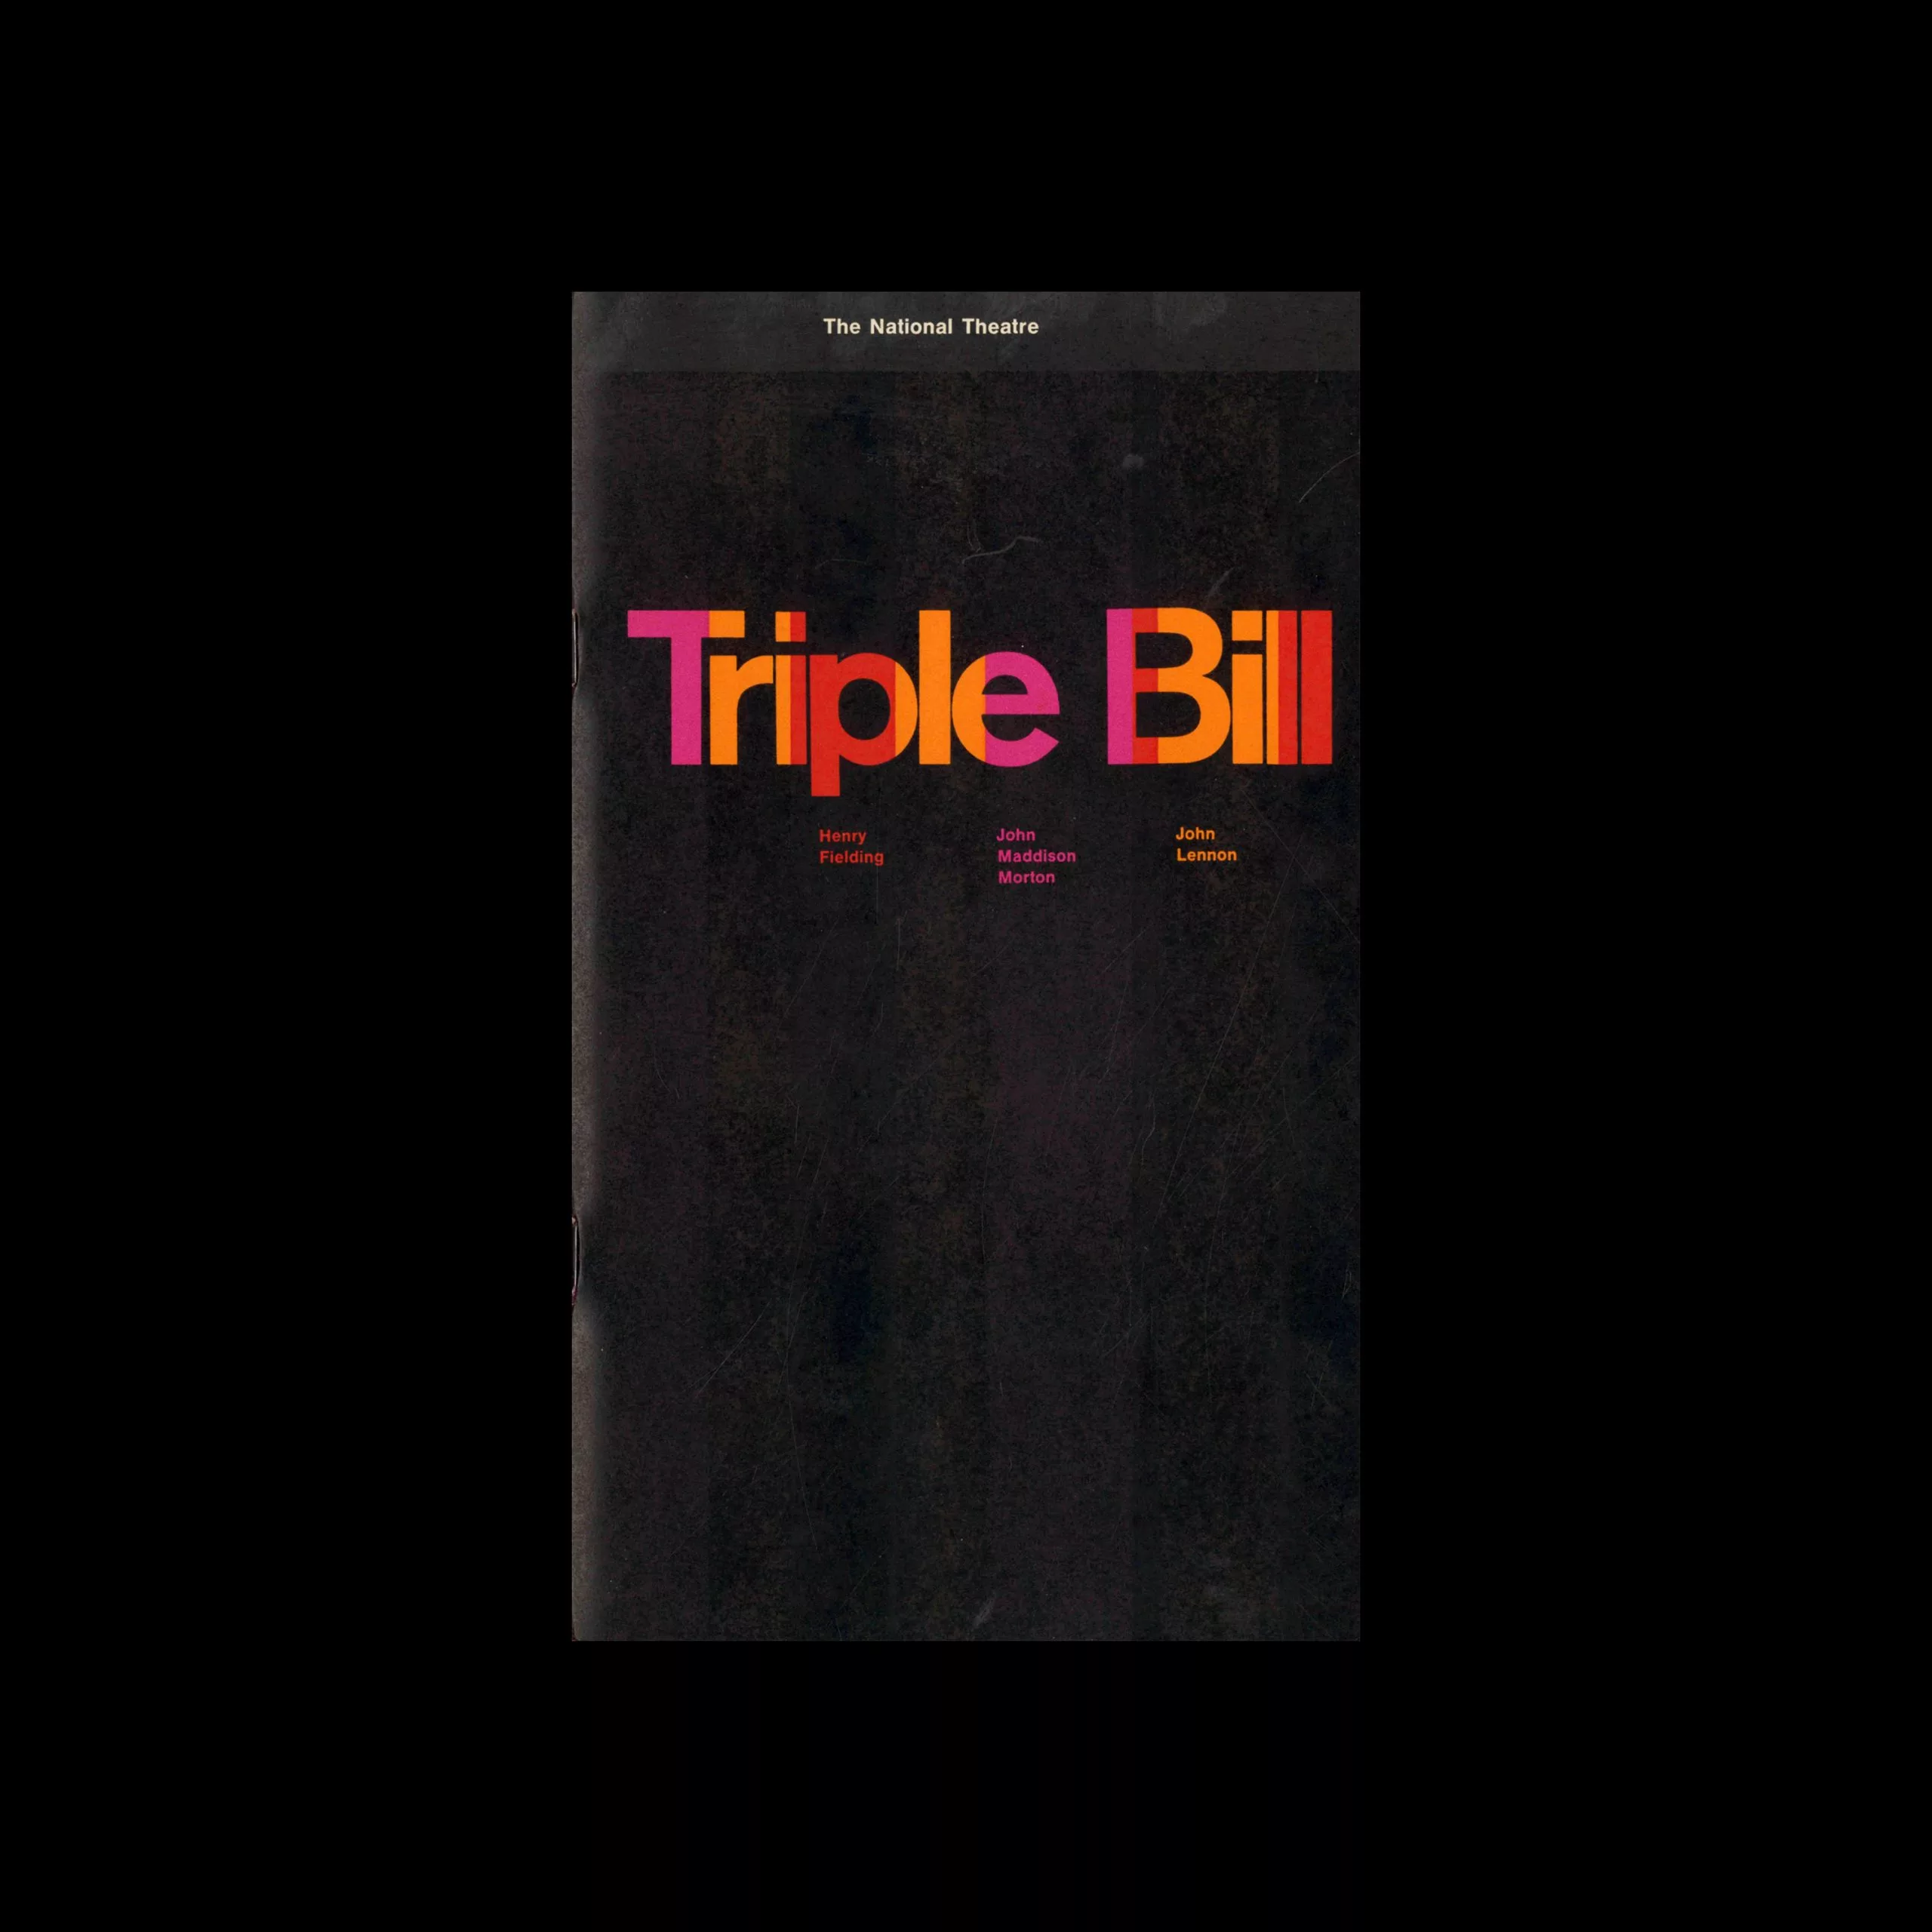 Triple Bill, The National Theatre, London, 1968. Designed by Ken Briggs and Susan Channells